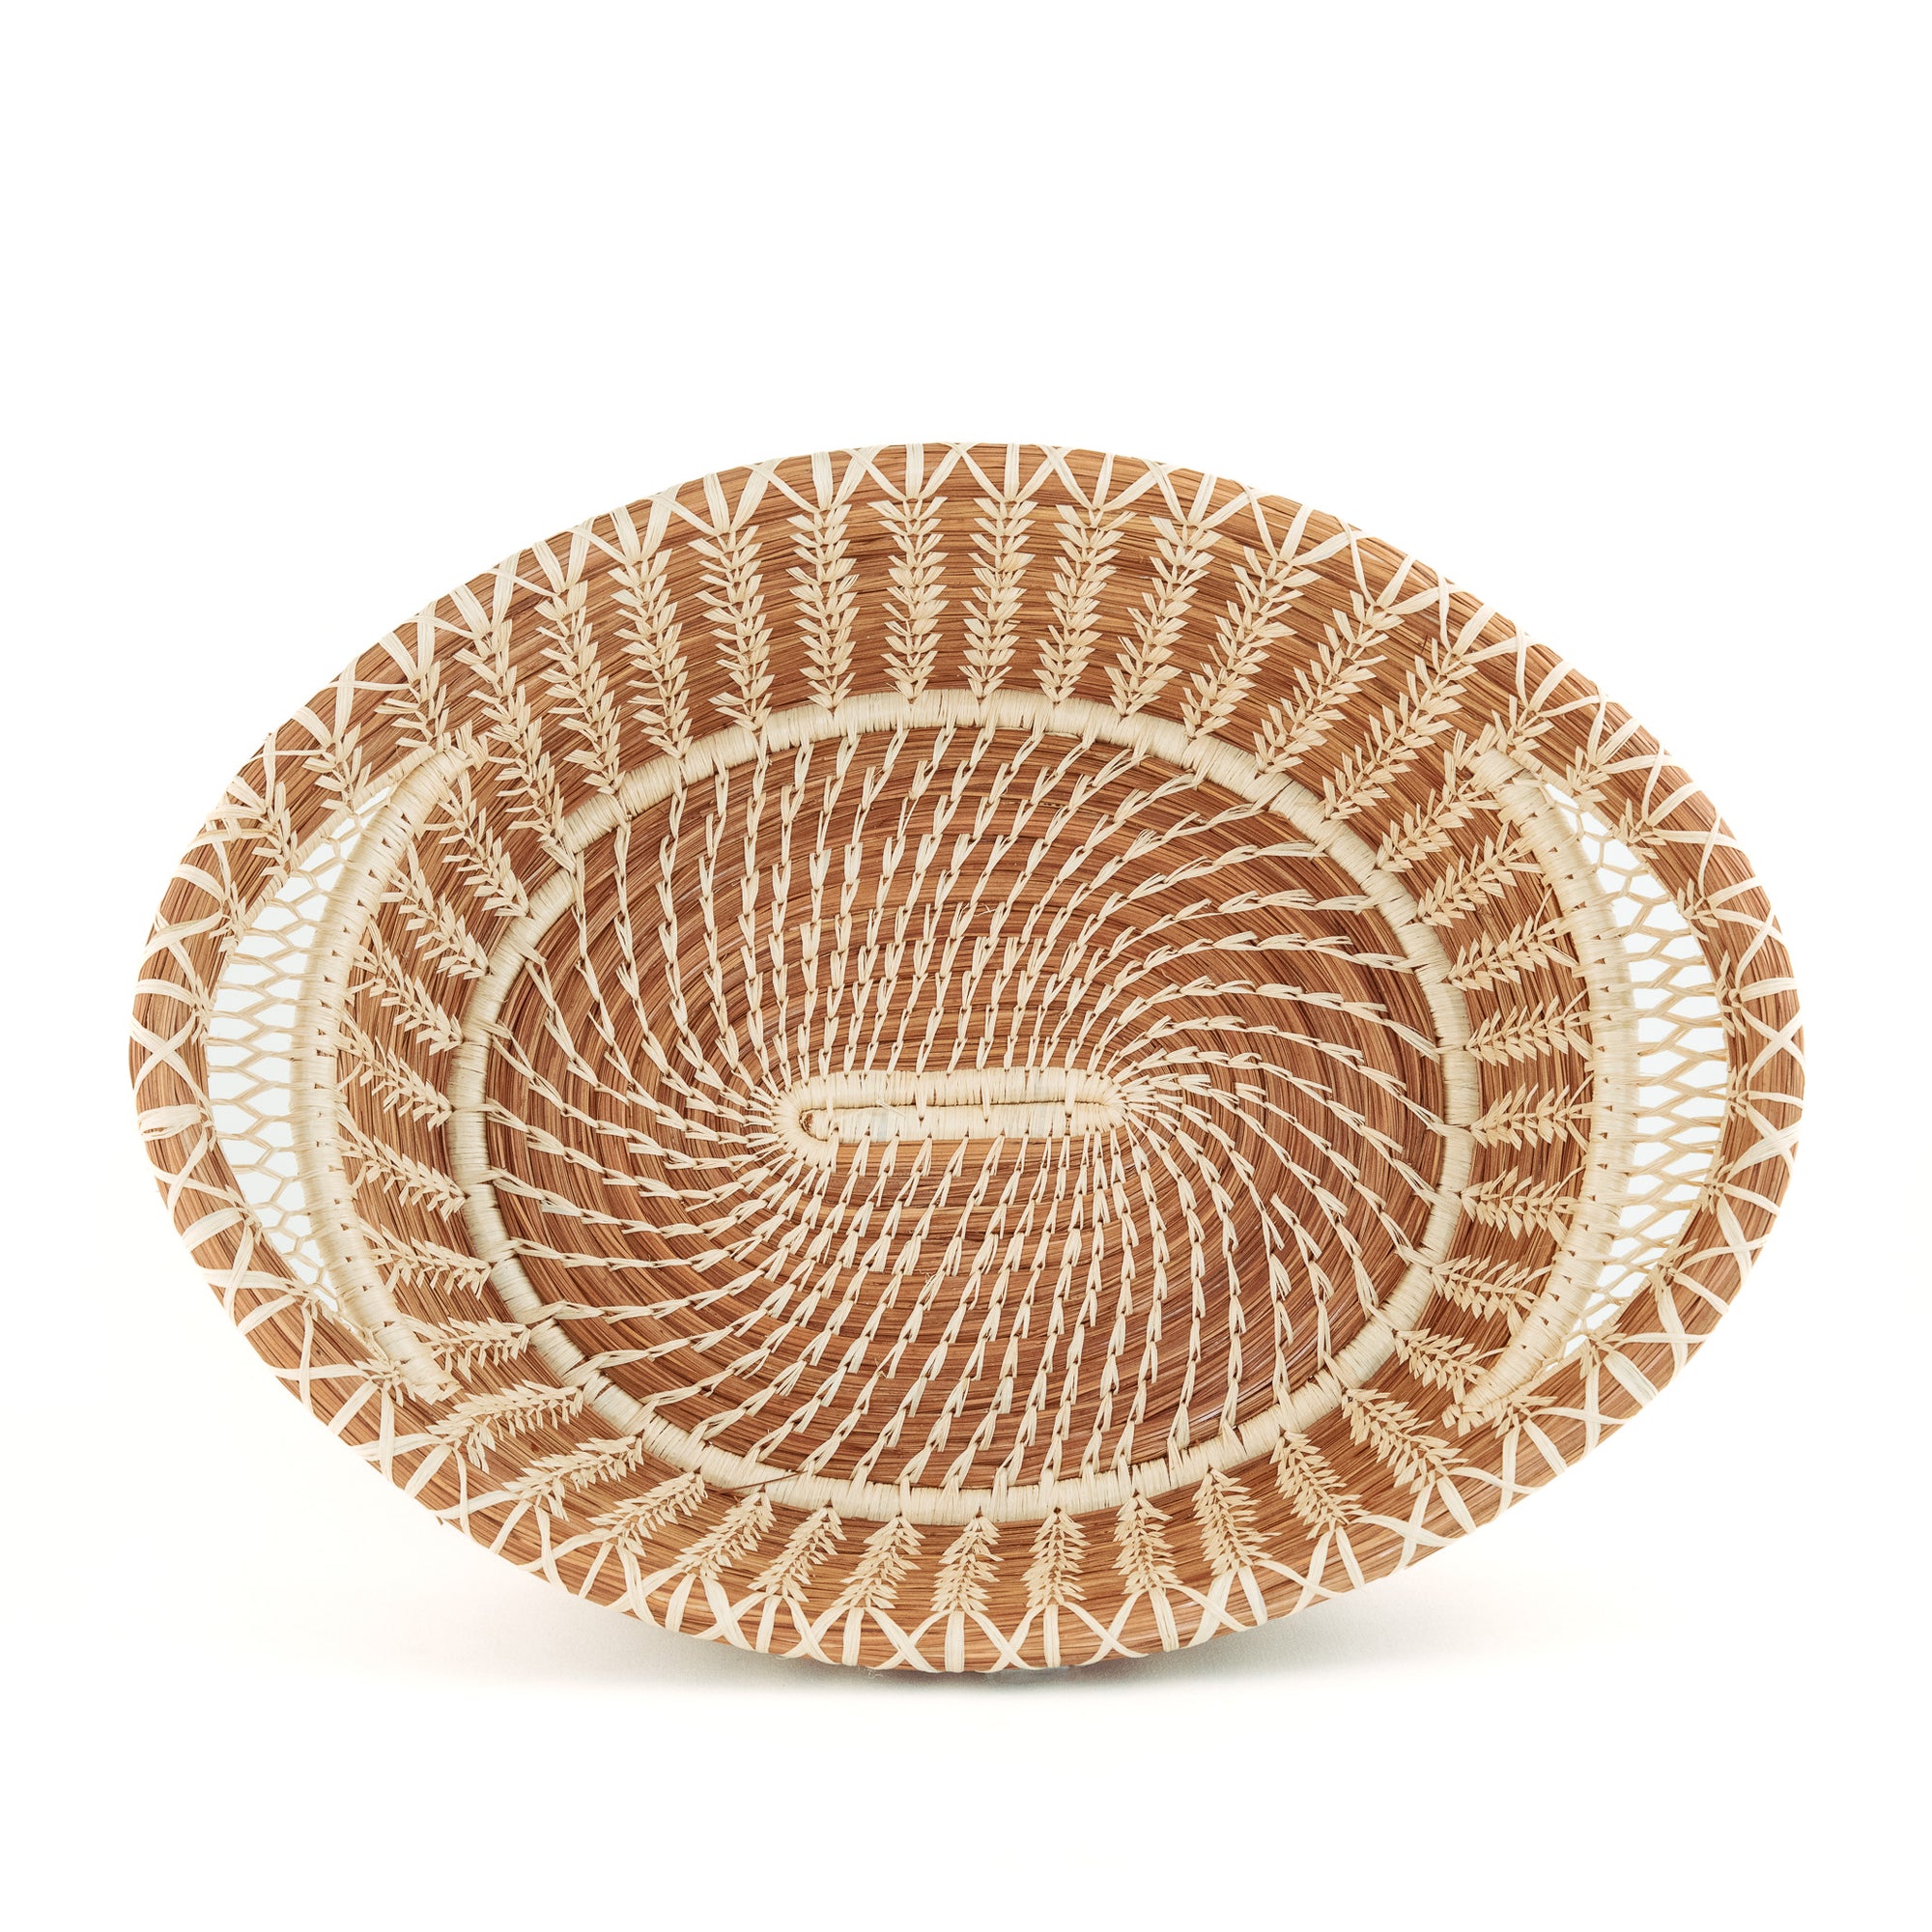 Large Pine Needle Baskets with Lacy Handles